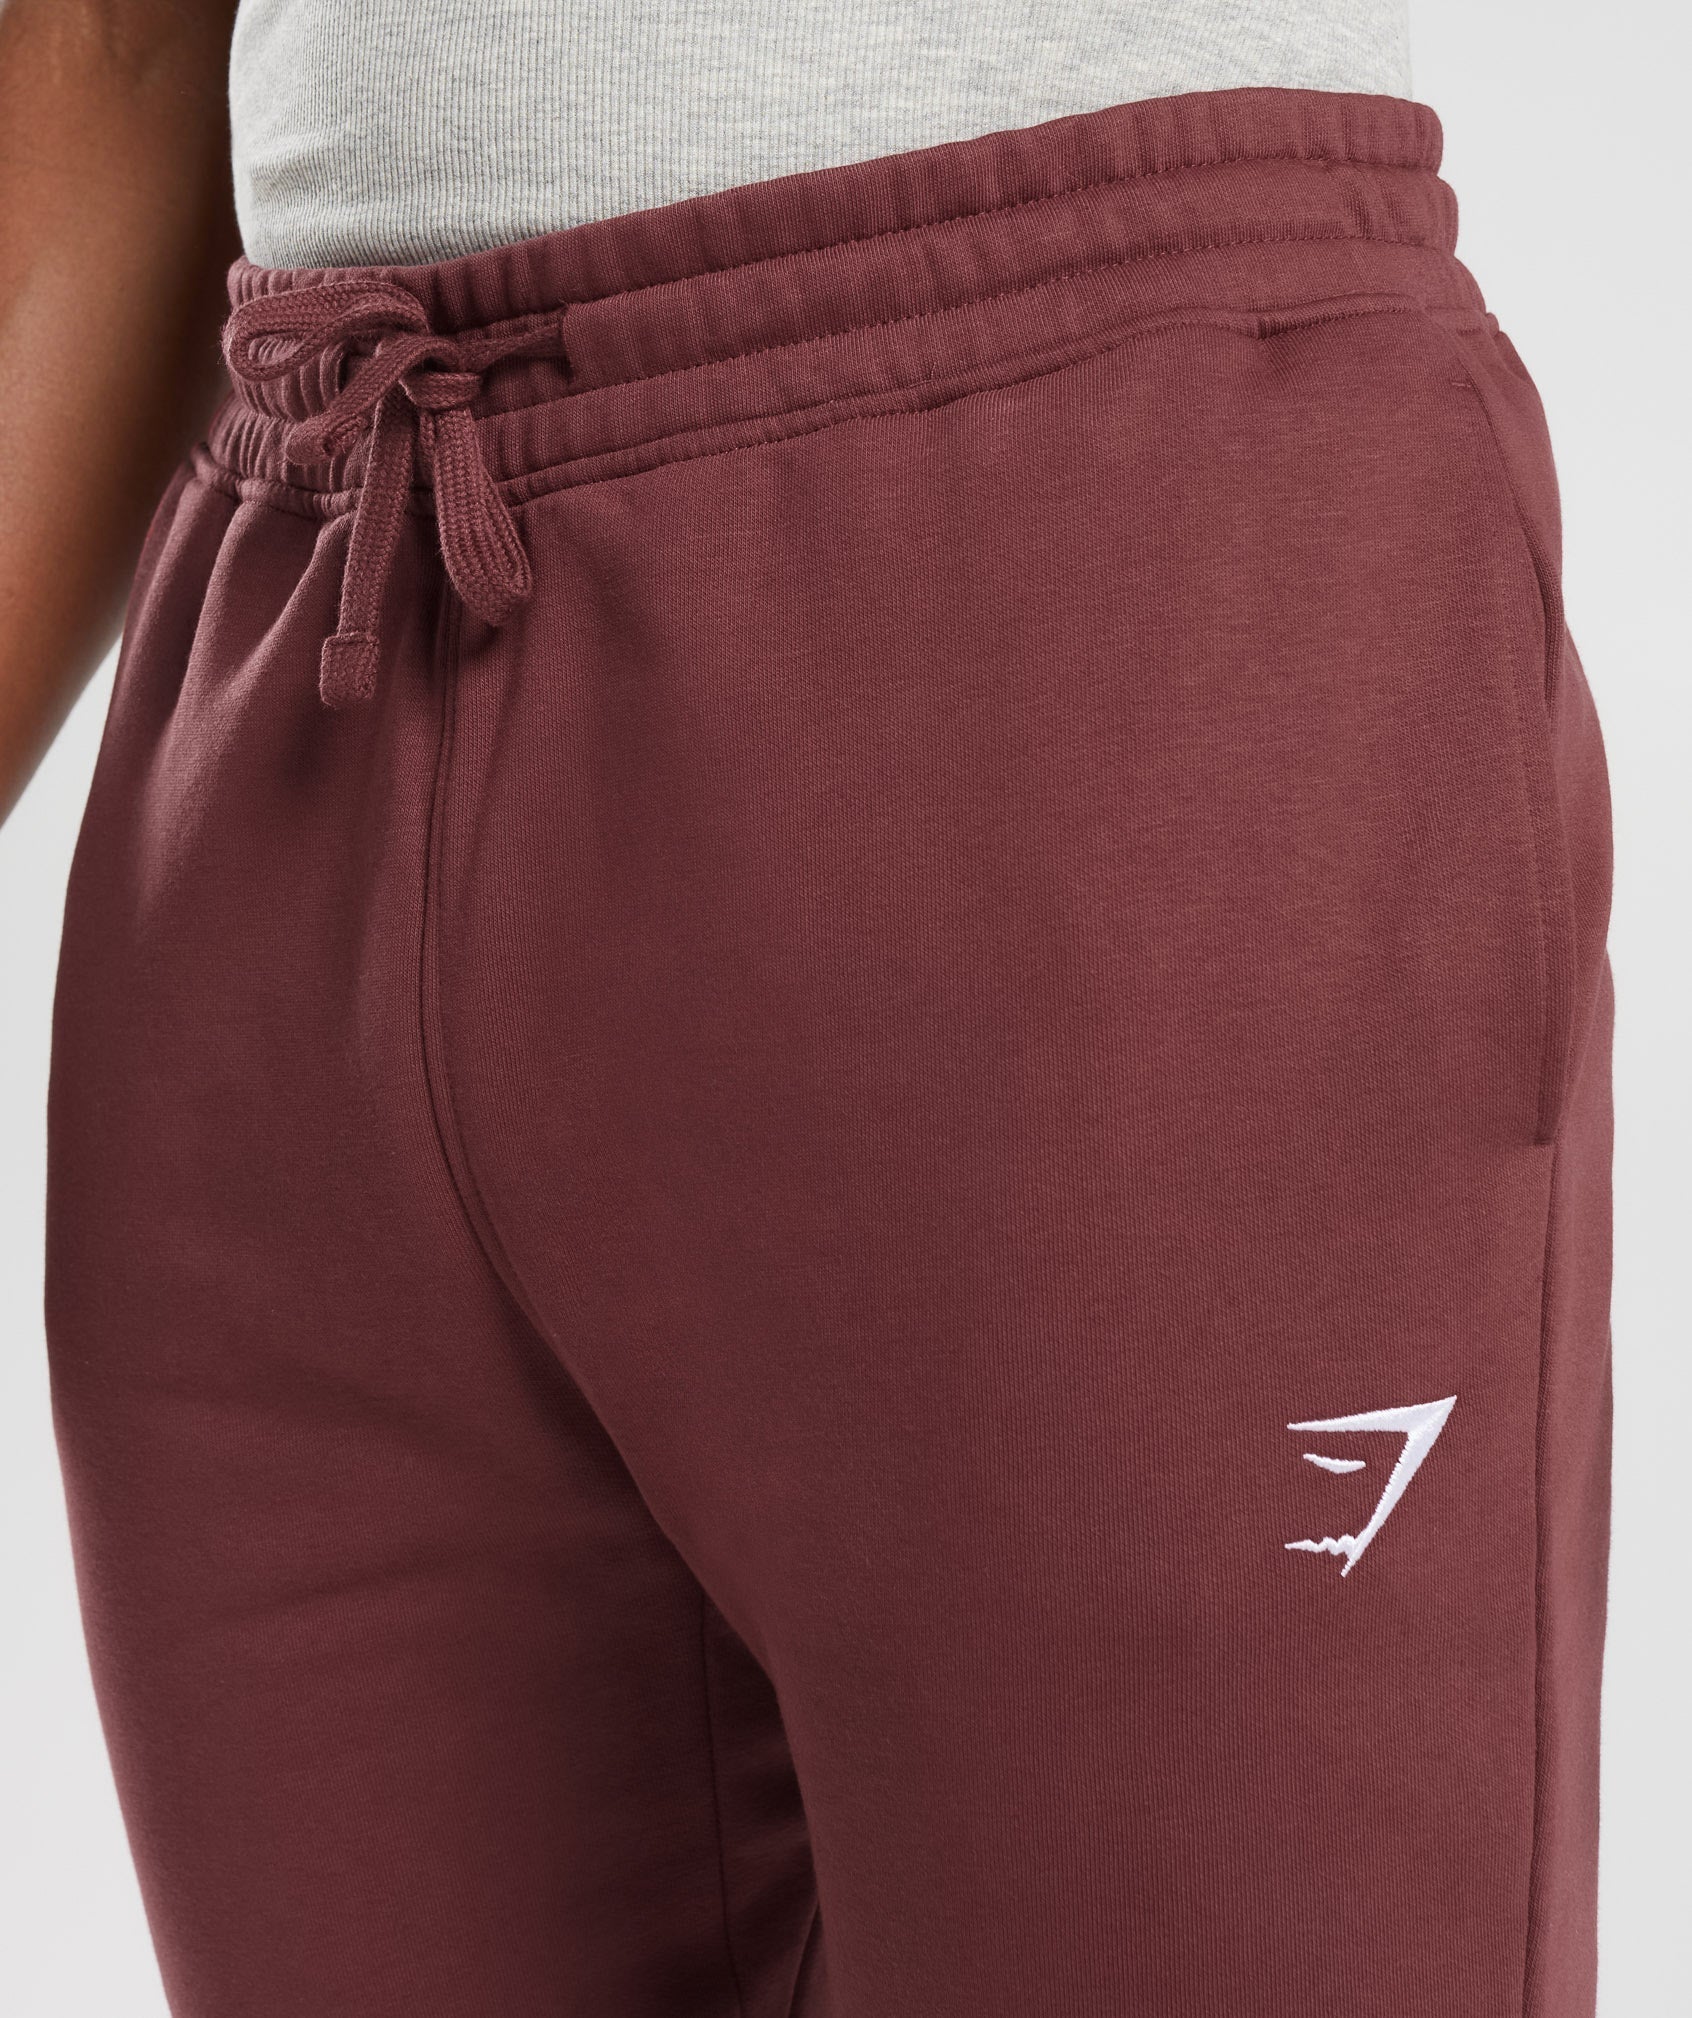 Crest Joggers in Washed Burgundy - view 5